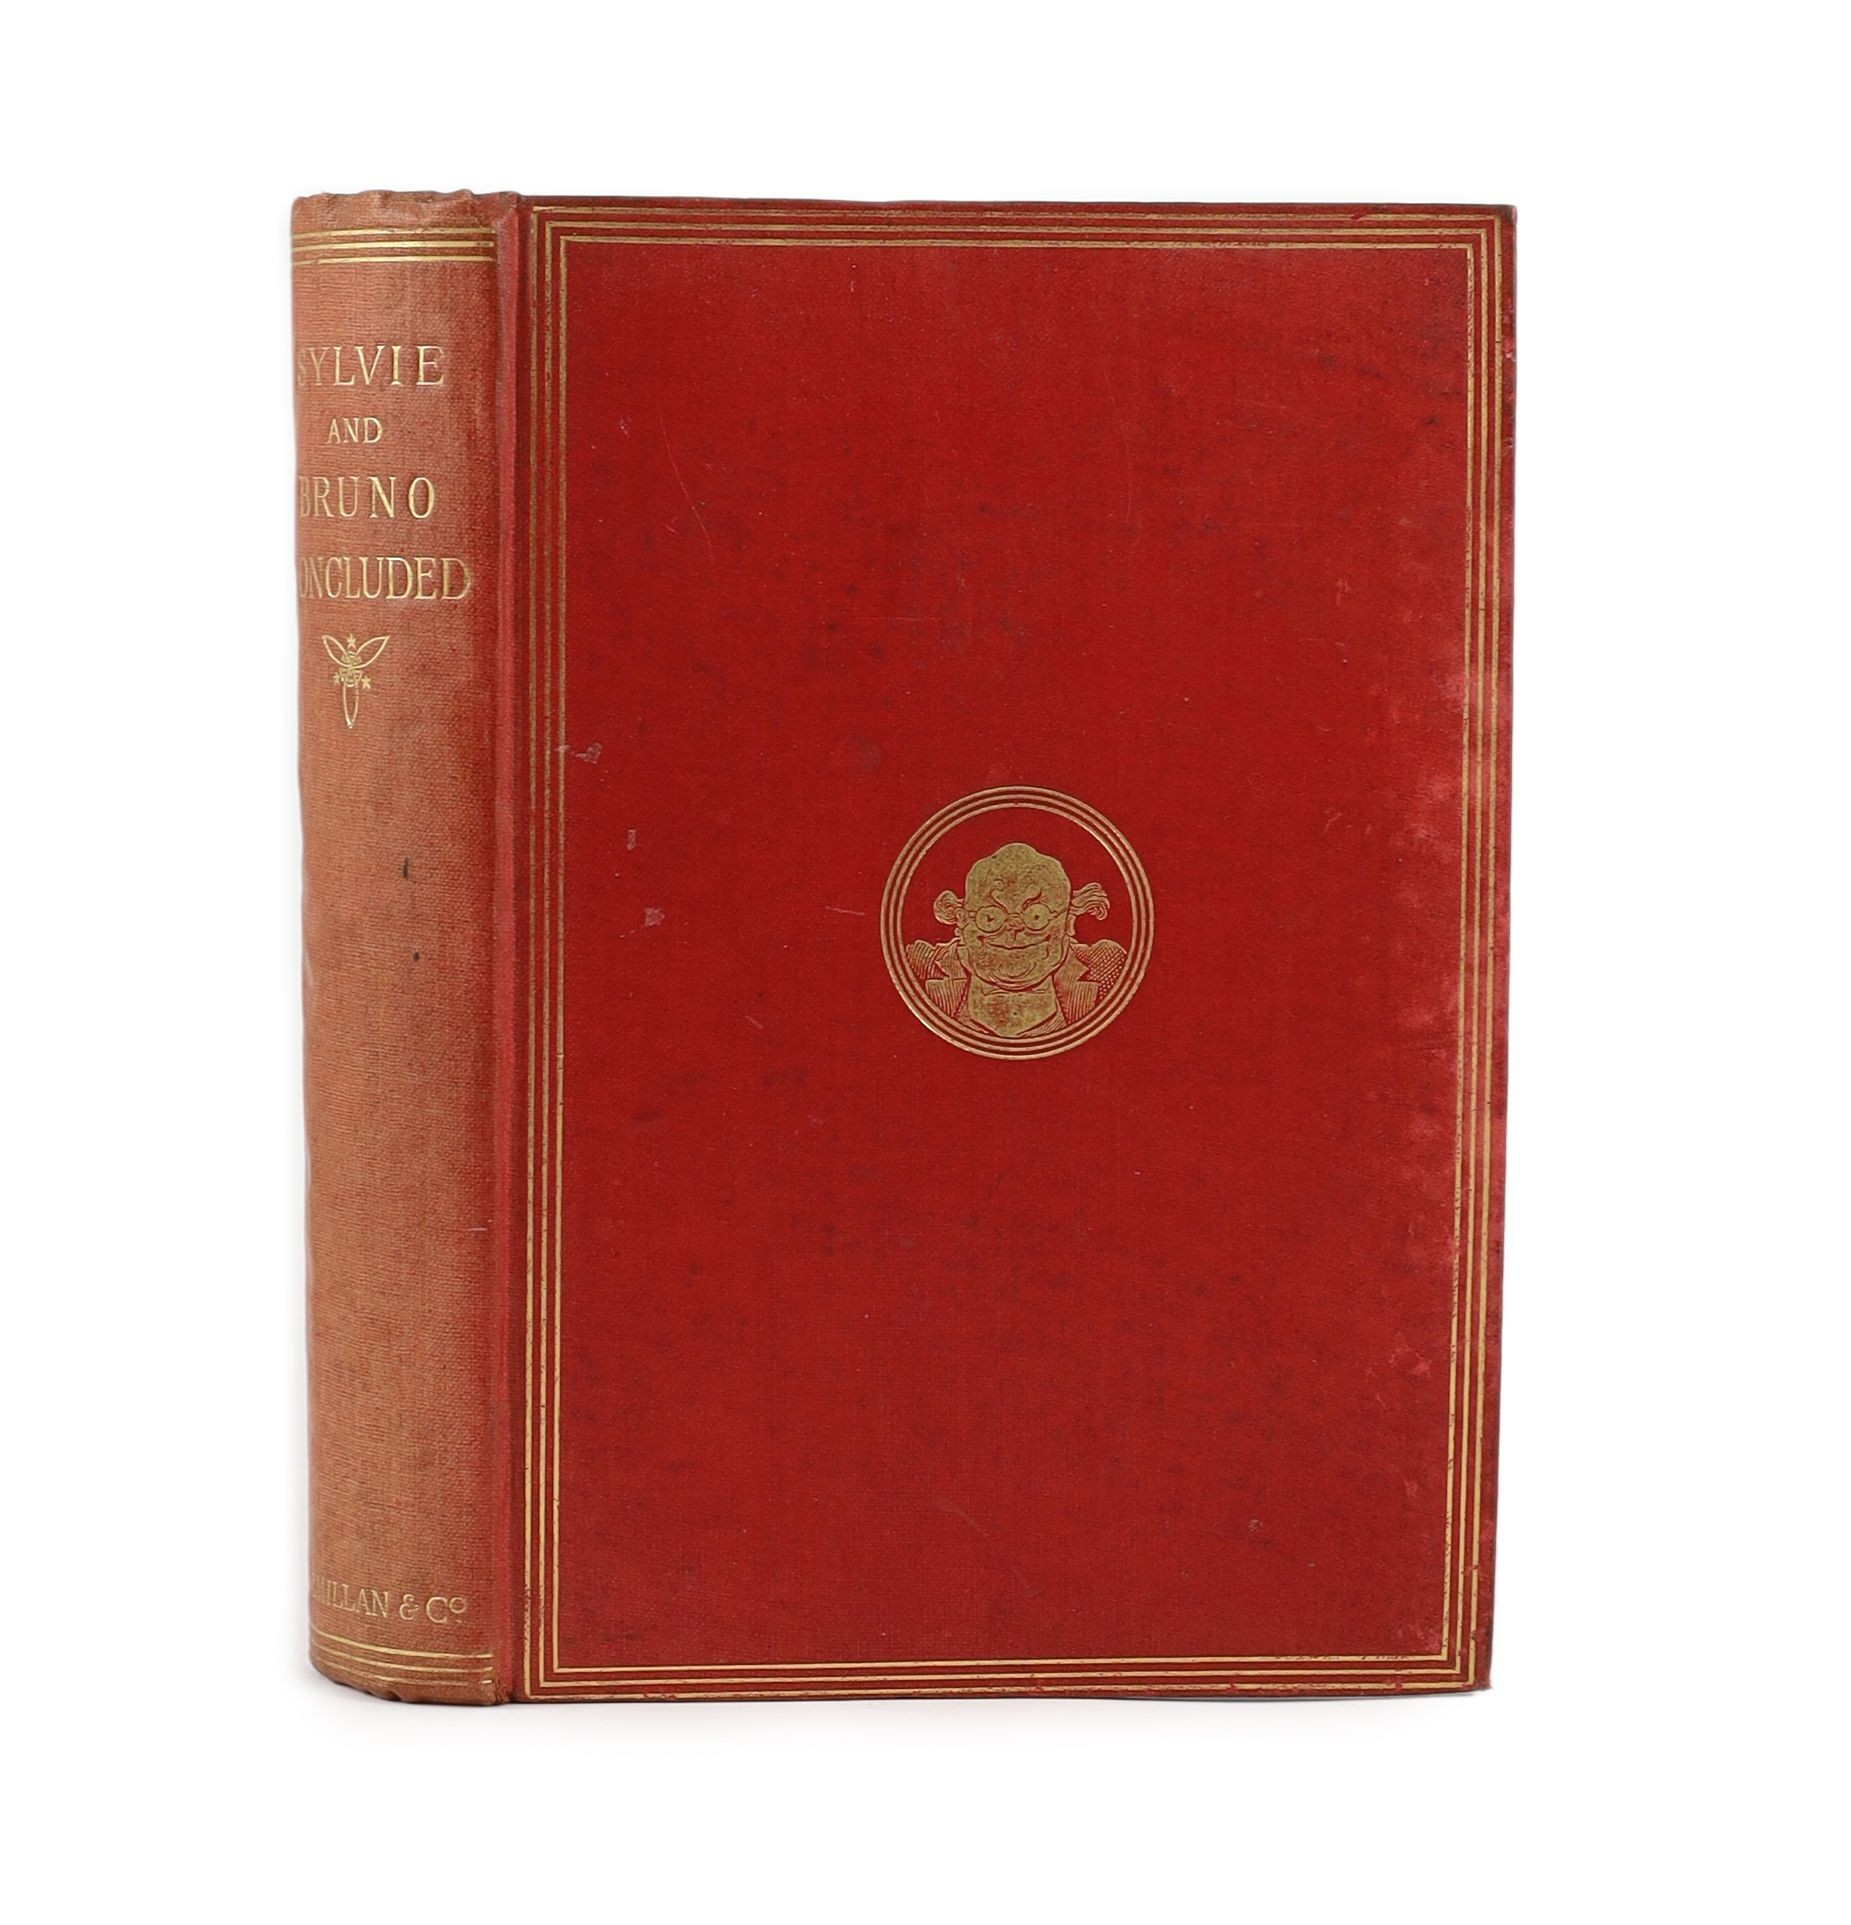 Dodgson, Charles Lutwidge (‘’Lewis Carroll’’) - Sylvie and Bruno Concluded, 1st edition, illustrated by Harry Furniss, advertisements at end, 8vo, original red cloth gilt, all edges gilt, half title inscribed, ‘’Mrs Fall